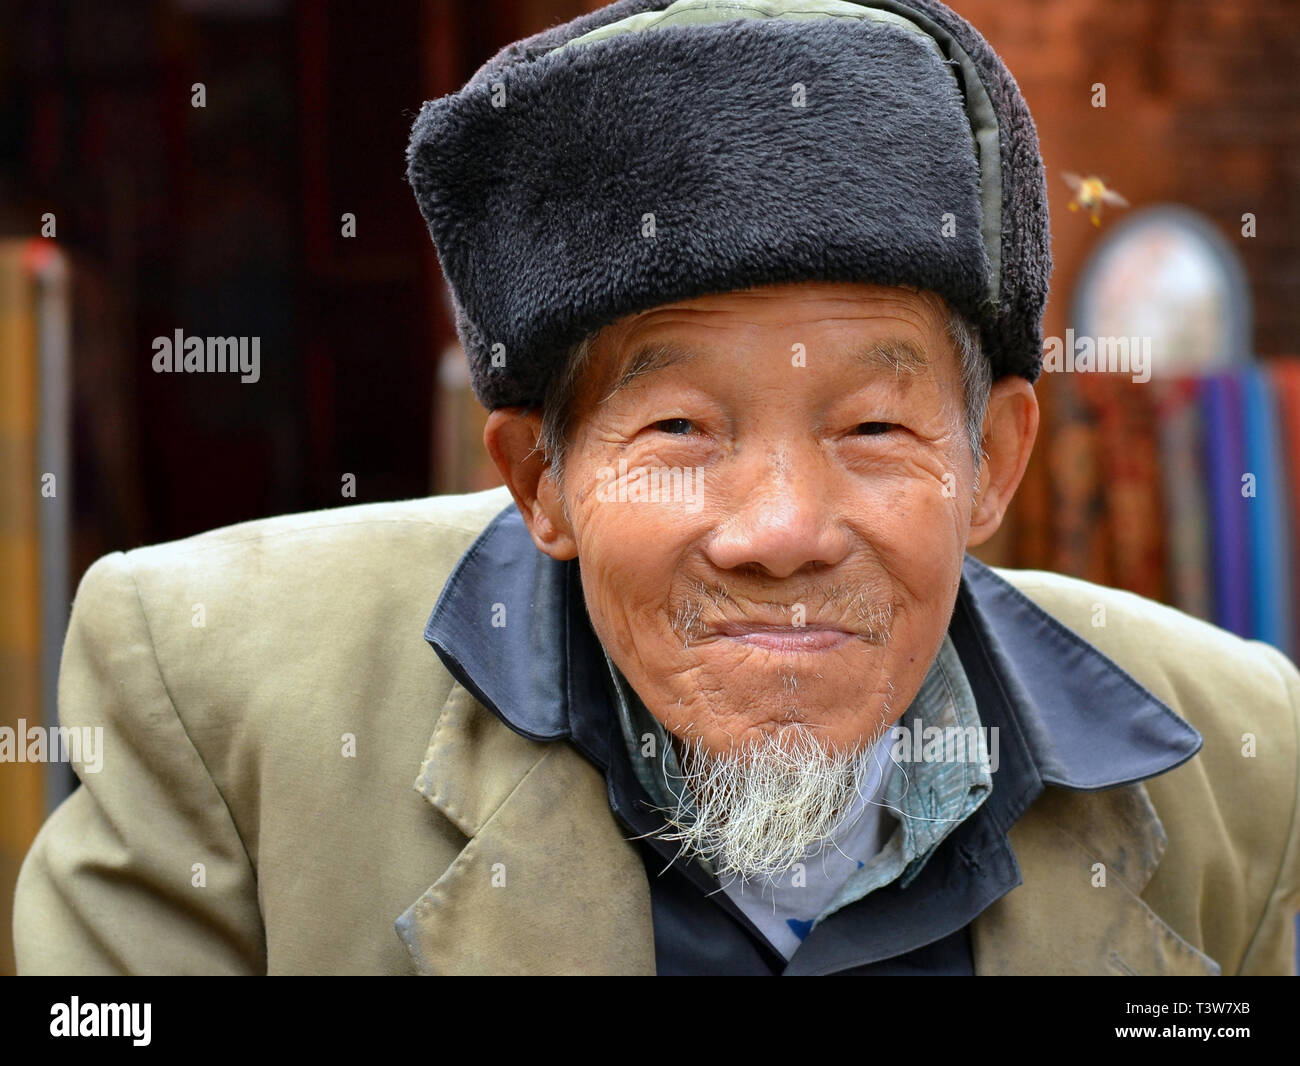 https://c8.alamy.com/comp/T3W7XB/old-chinese-river-fisherman-wears-a-military-style-ushanka-hat-and-smiles-for-the-camera-T3W7XB.jpg